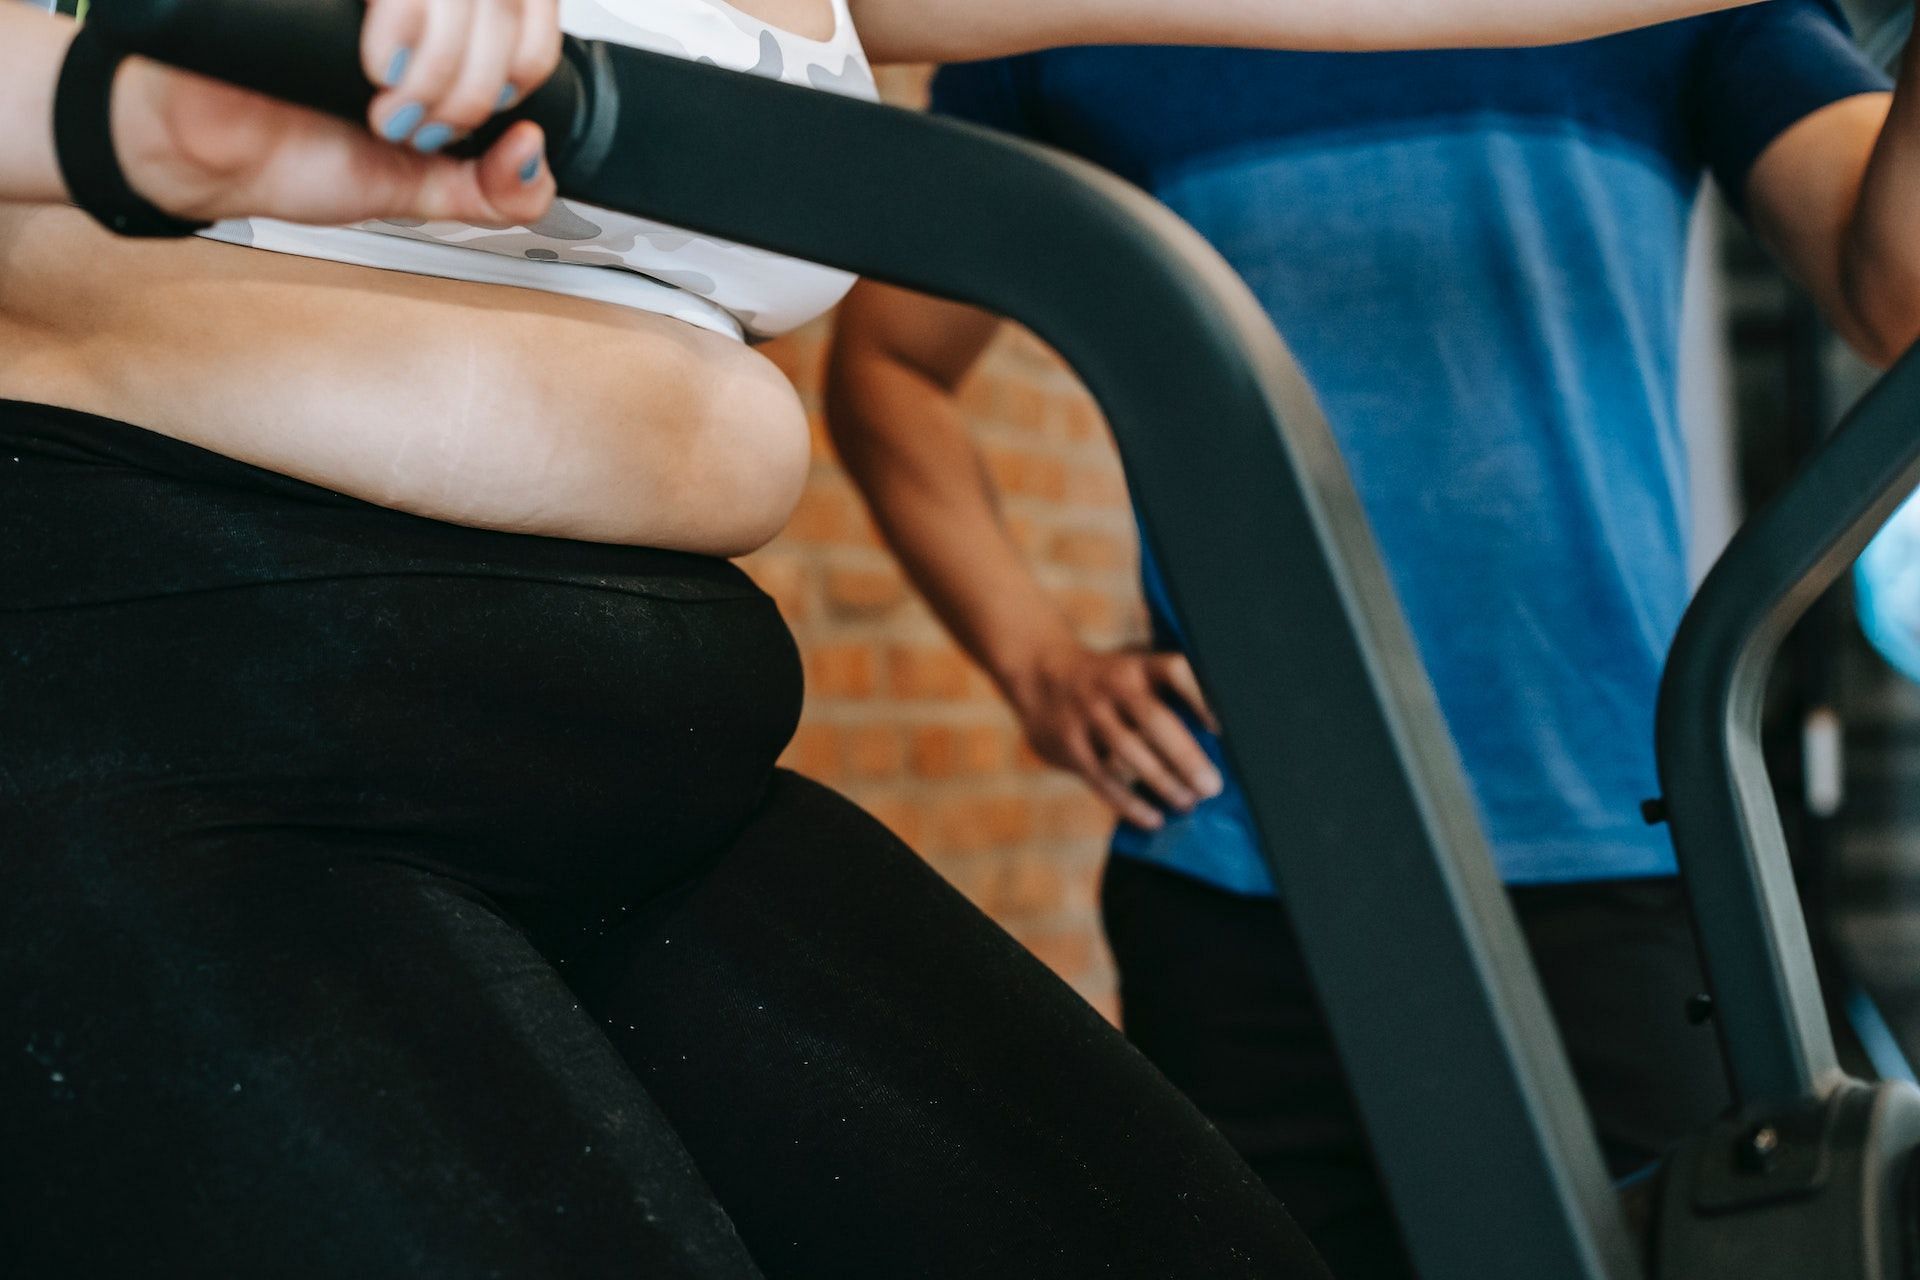 Spinning can reduce weight. (Photo via Pexels/Andres Ayrton)